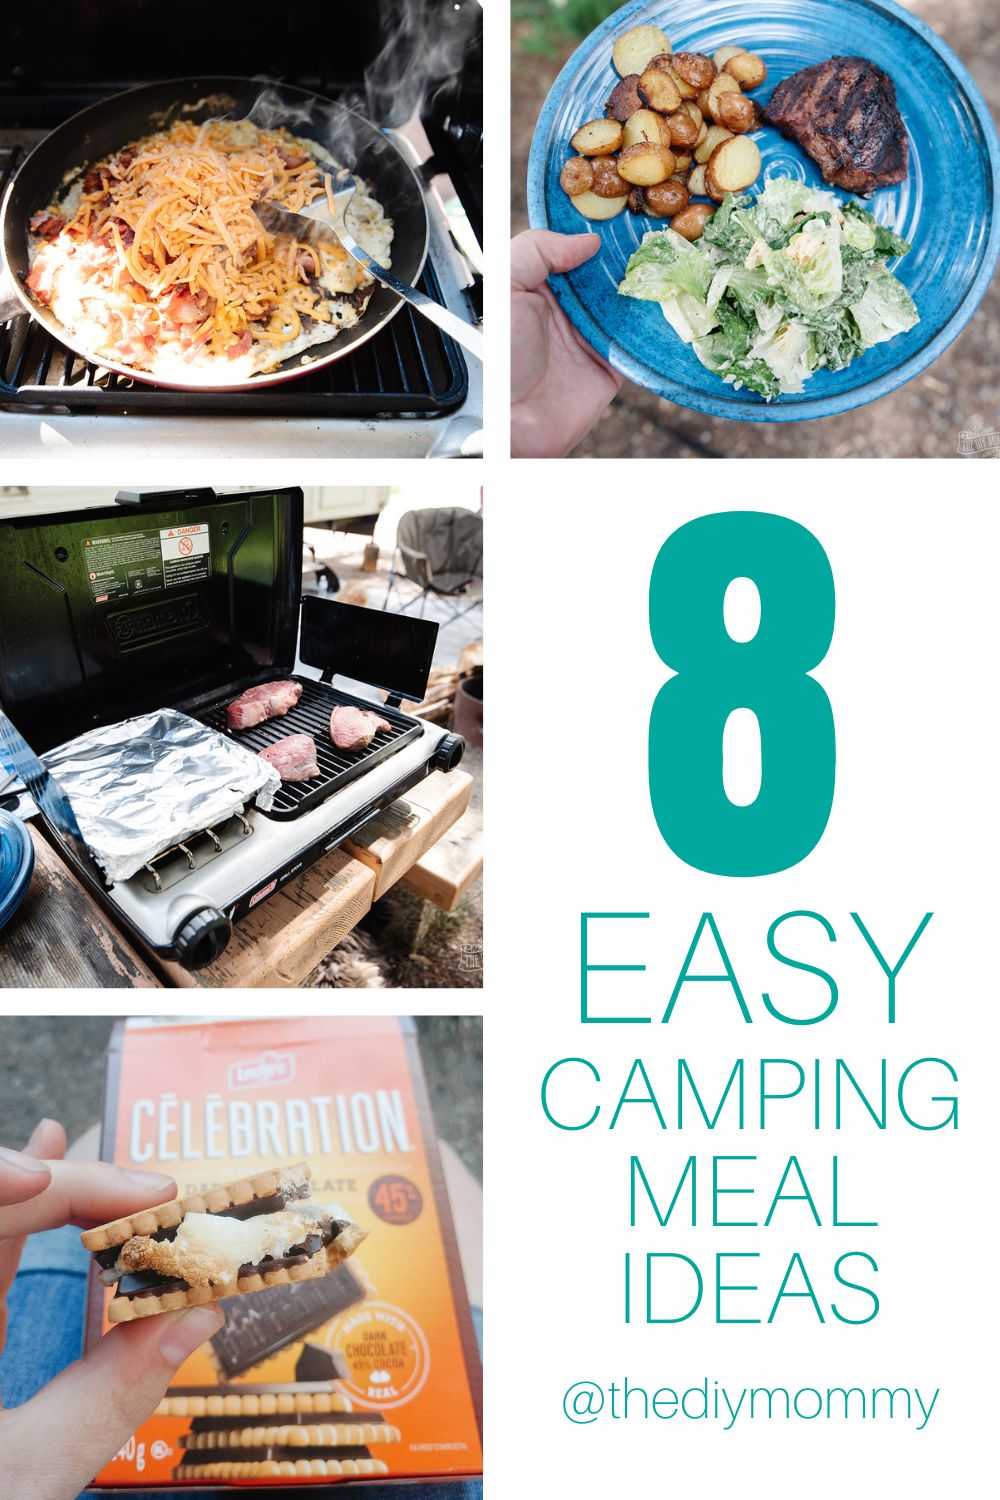 Simple camping food ideas, meal plan, grocery list and tips to have an enjoyable camping trip!